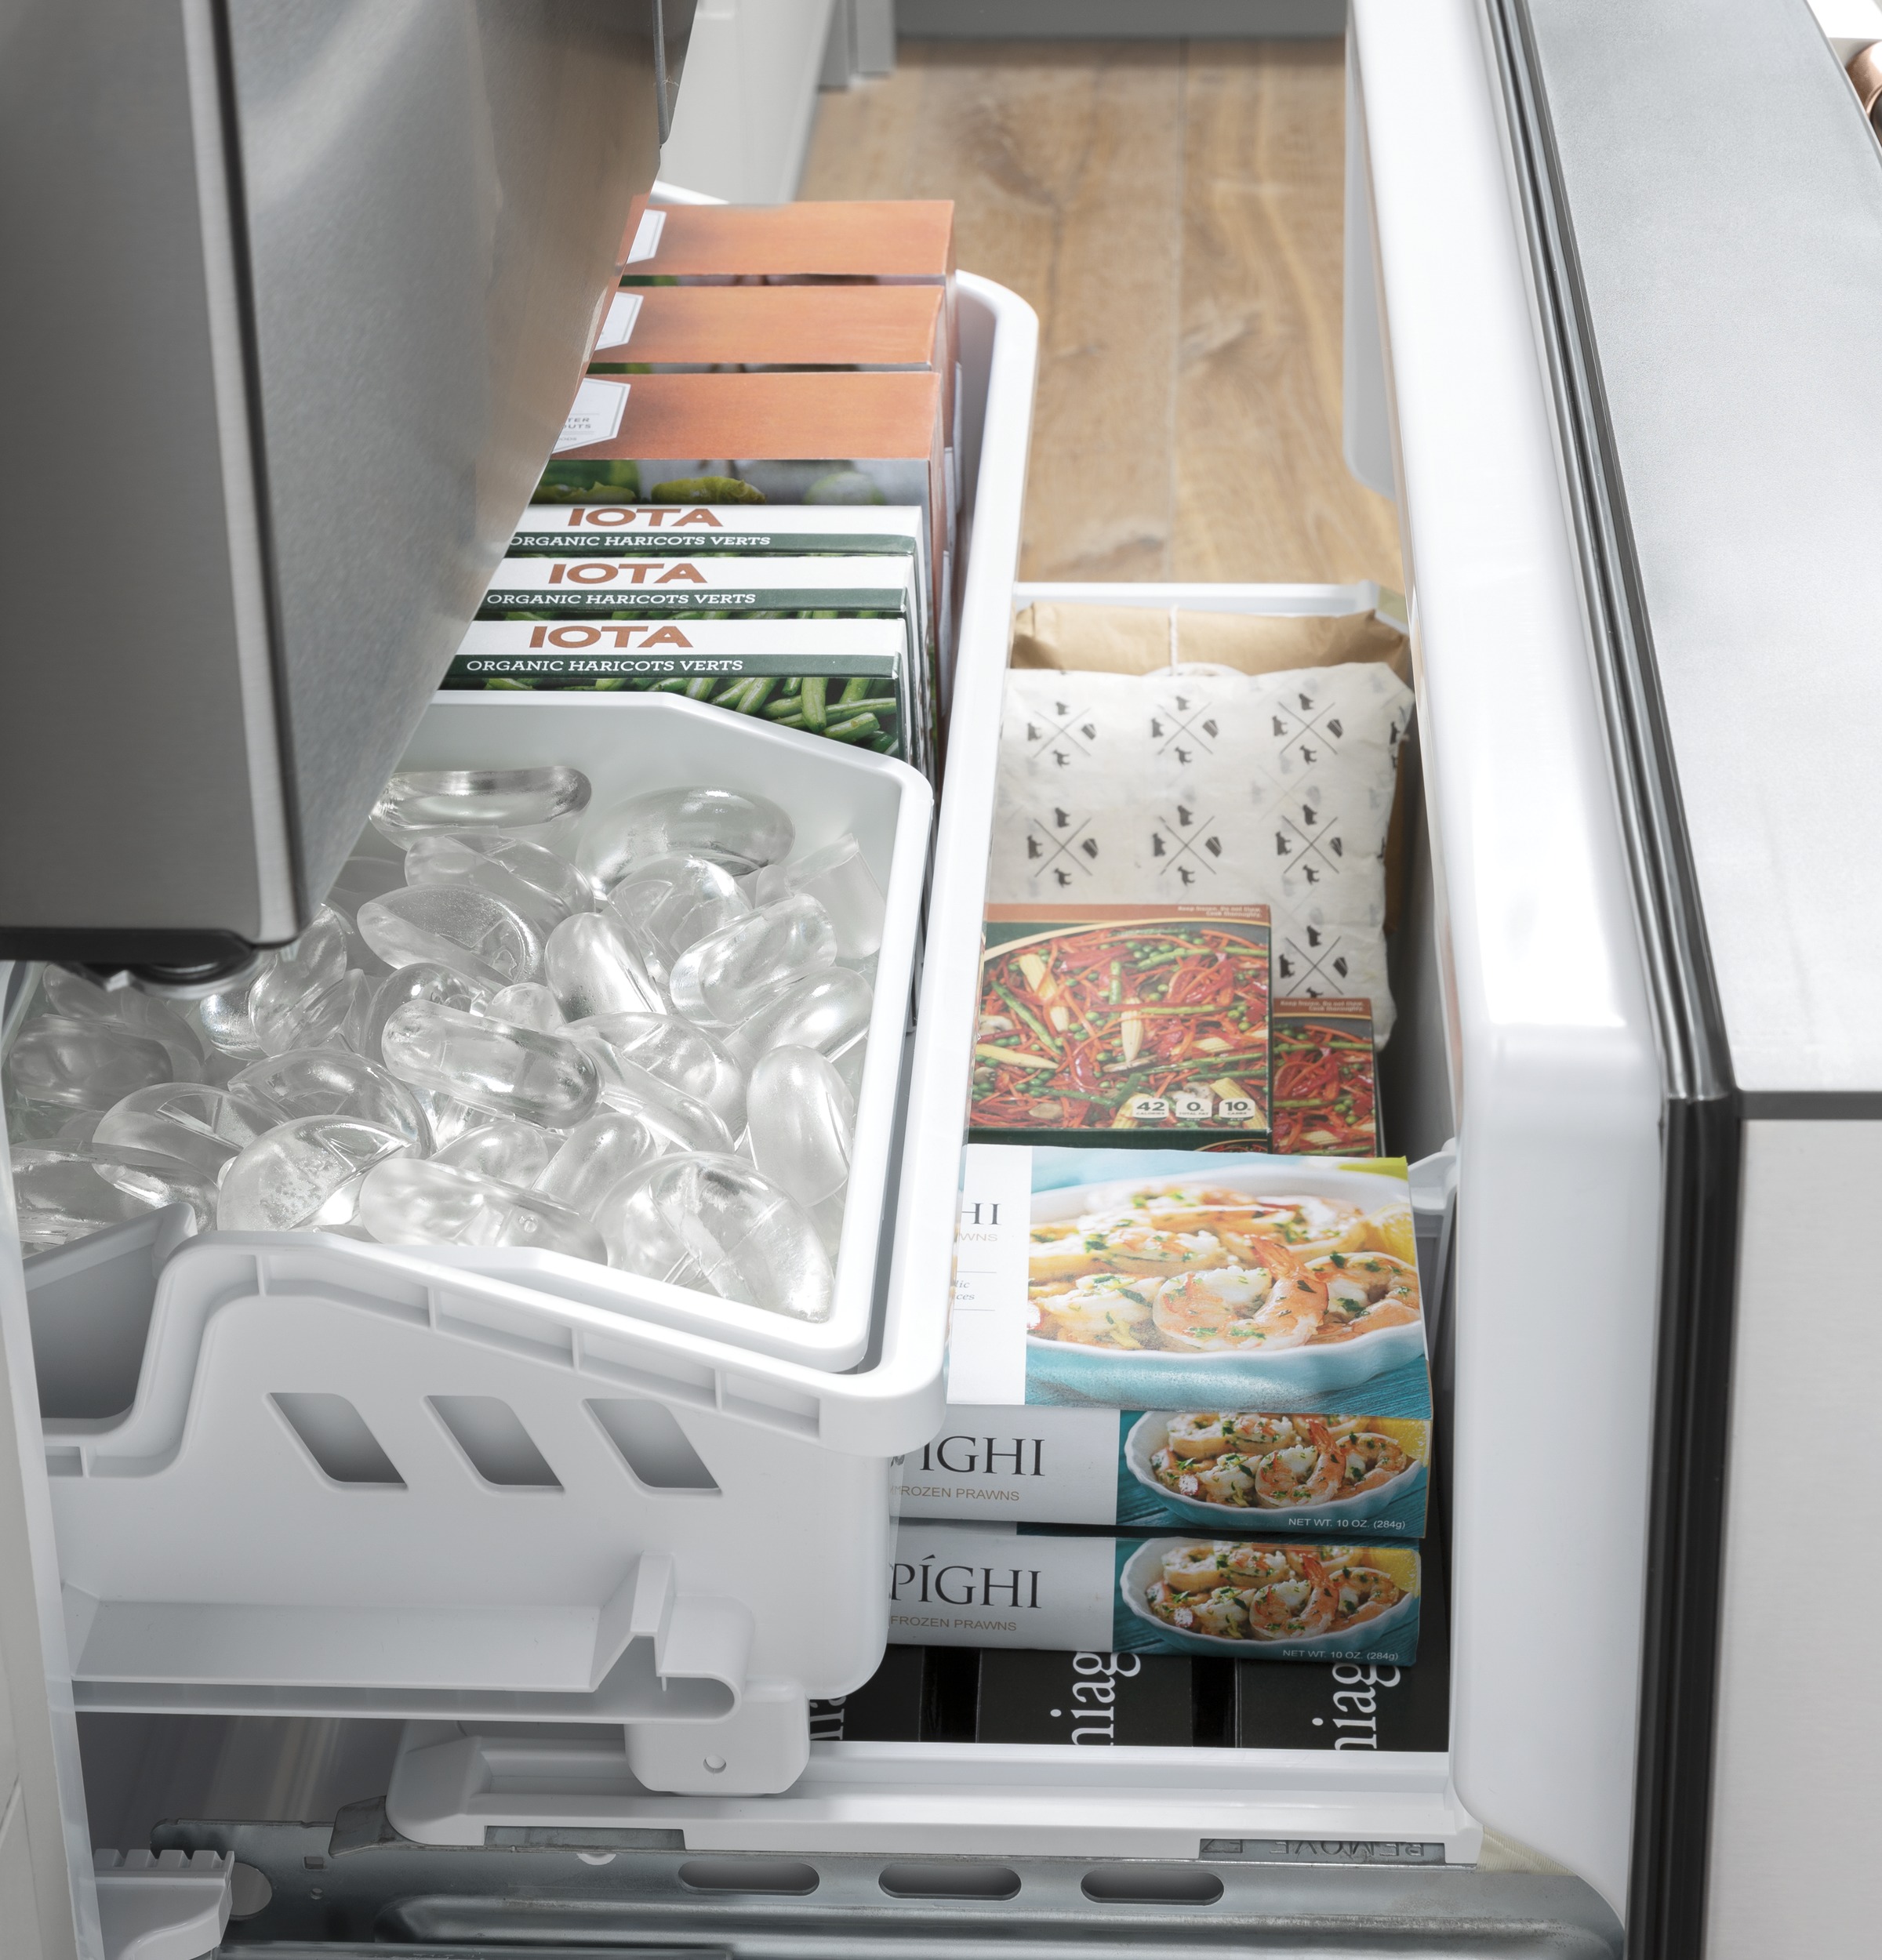 Even your refrigerator is clutter free